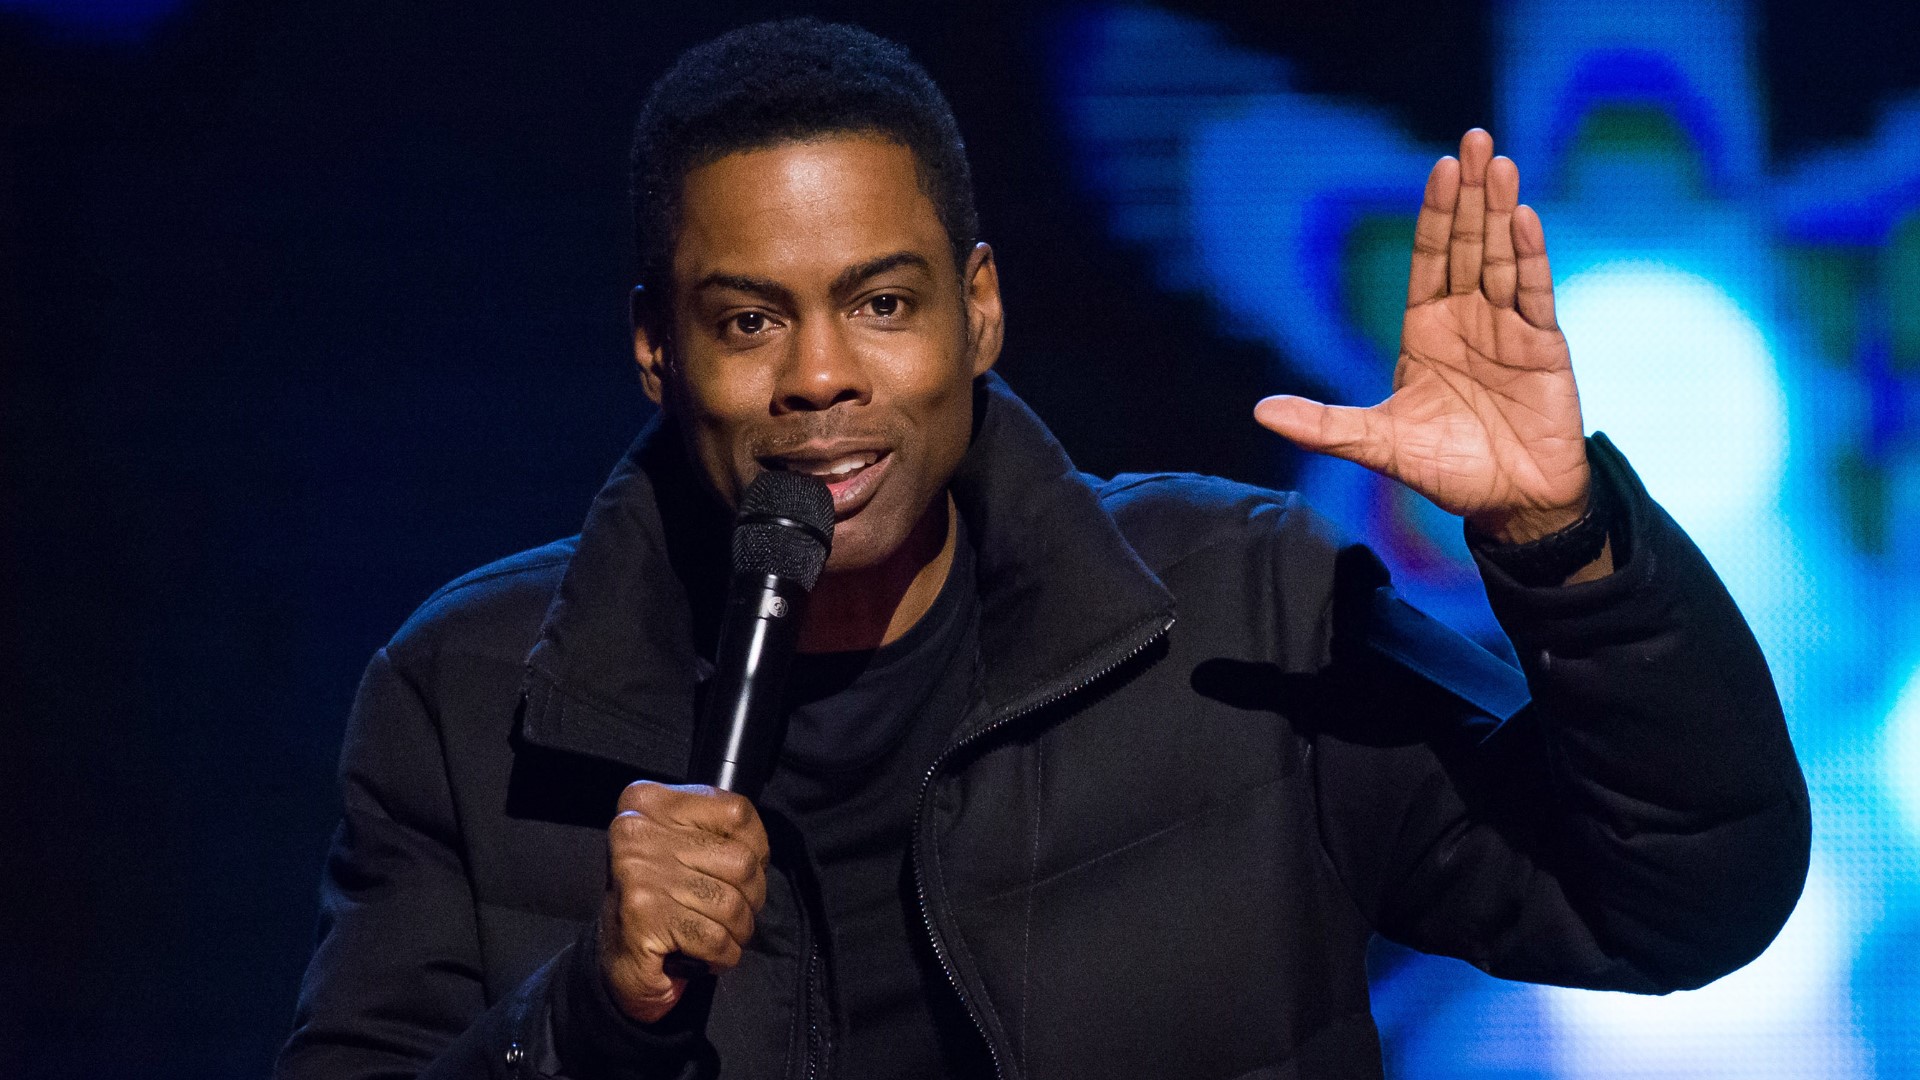 Chris Rock performed at the Fox Theatre in Atlanta last night after Will Smith released a video apology over the infamous Oscars slap.